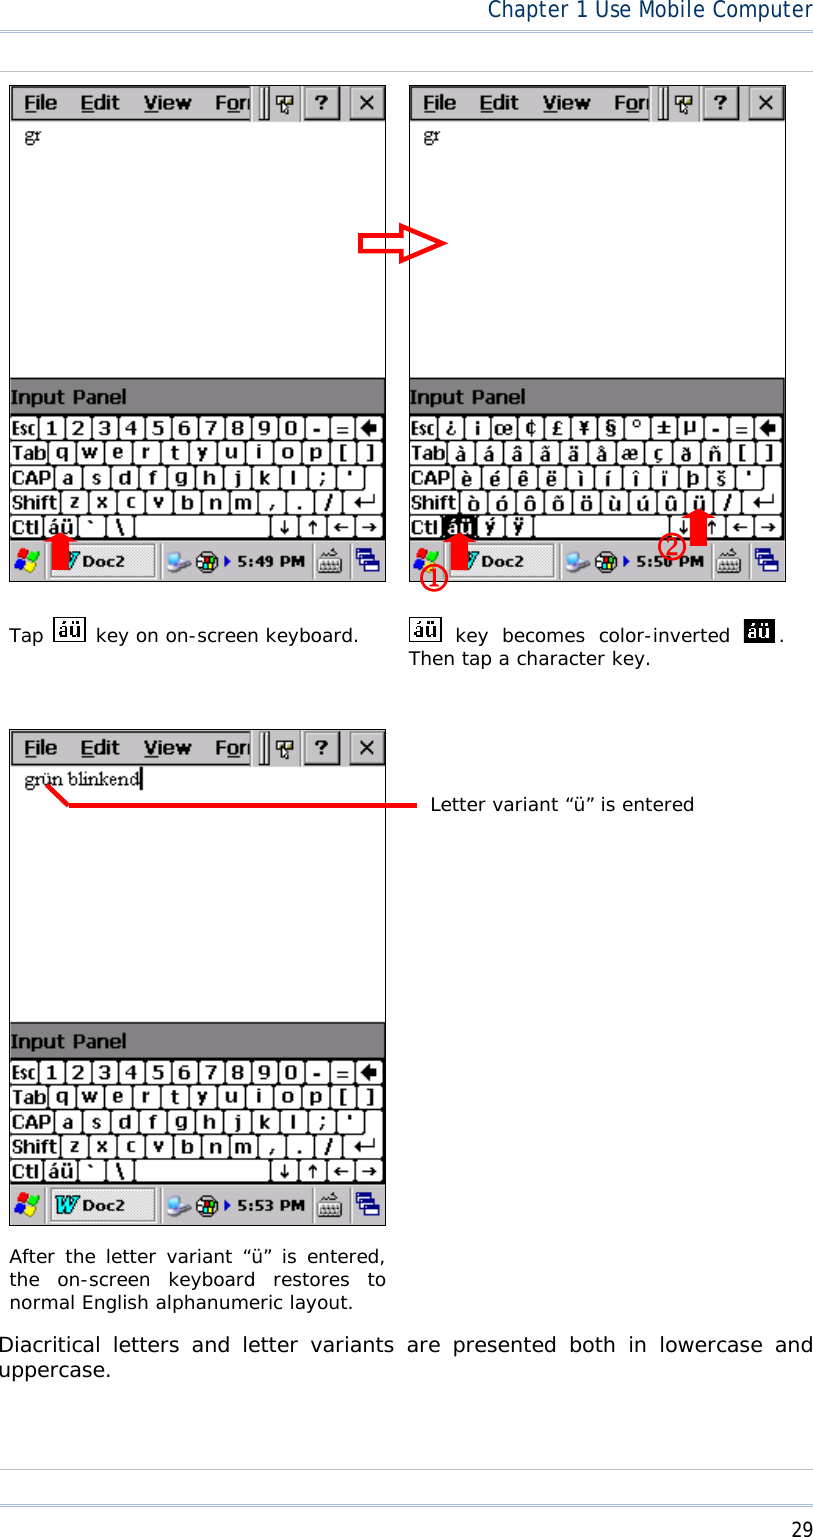  29Chapter1 Use Mobile ComputerTap  key on on-screen keyboard.   key becomes color-inverted  .Then tap a character key. After the letter variant “ü” is entered, the on-screen keyboard restores to normal English alphanumeric layout. Diacritical letters and letter variants are presented both in lowercase and uppercase.MNLetter variant “ü” is entered 